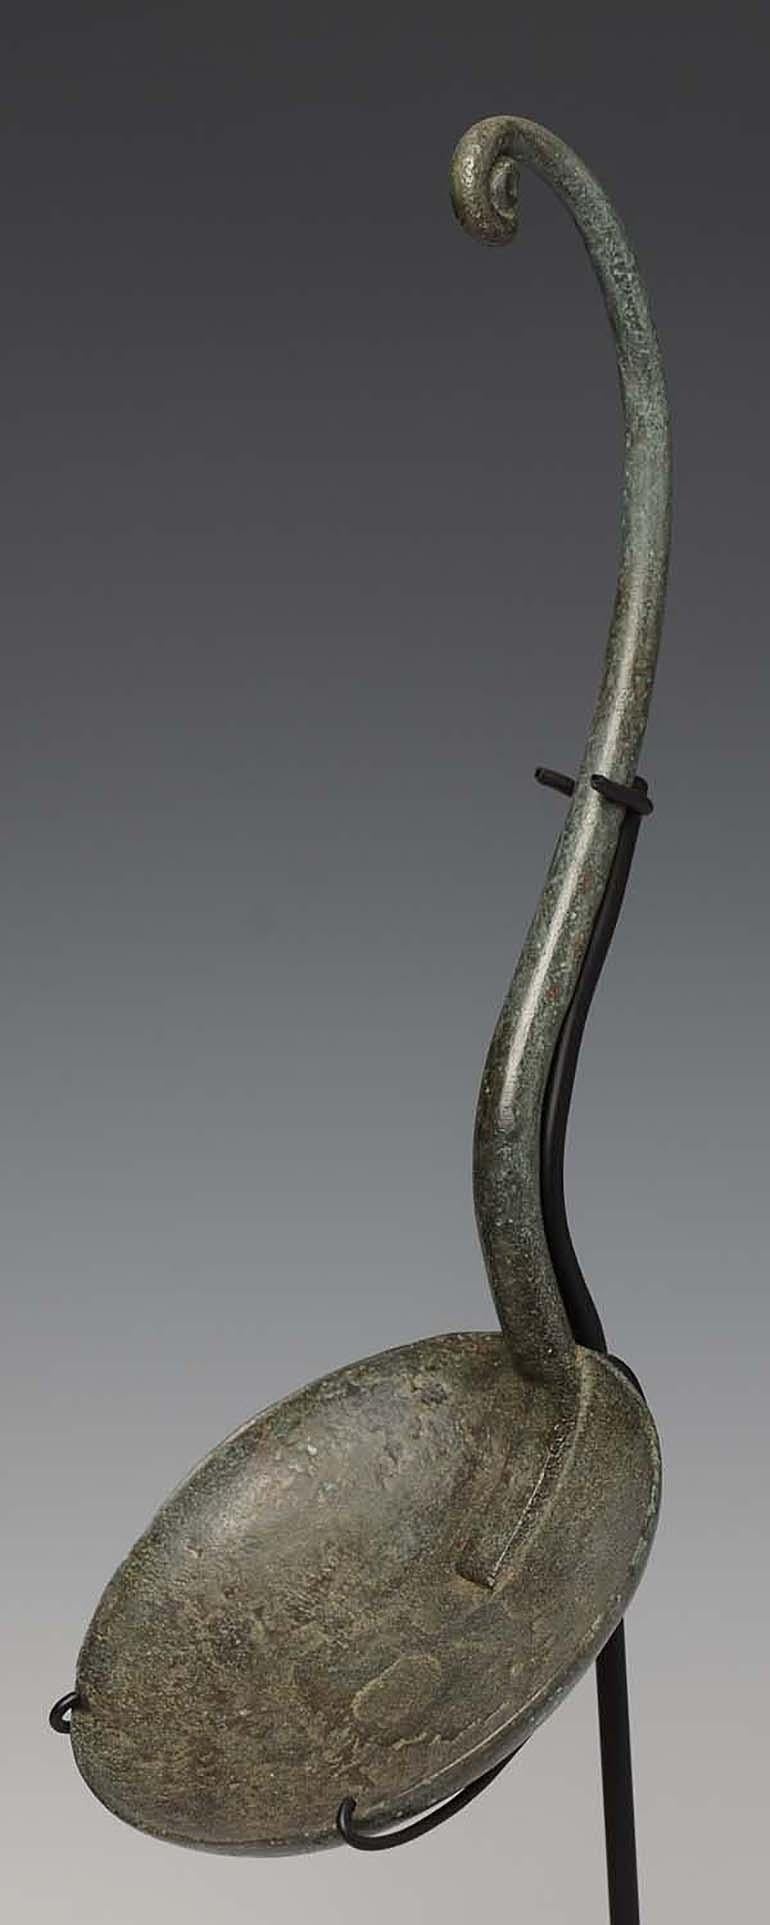 Cambodian 500 B.C., Dong Son, a Pair of Antique Khmer Bronze Ladles